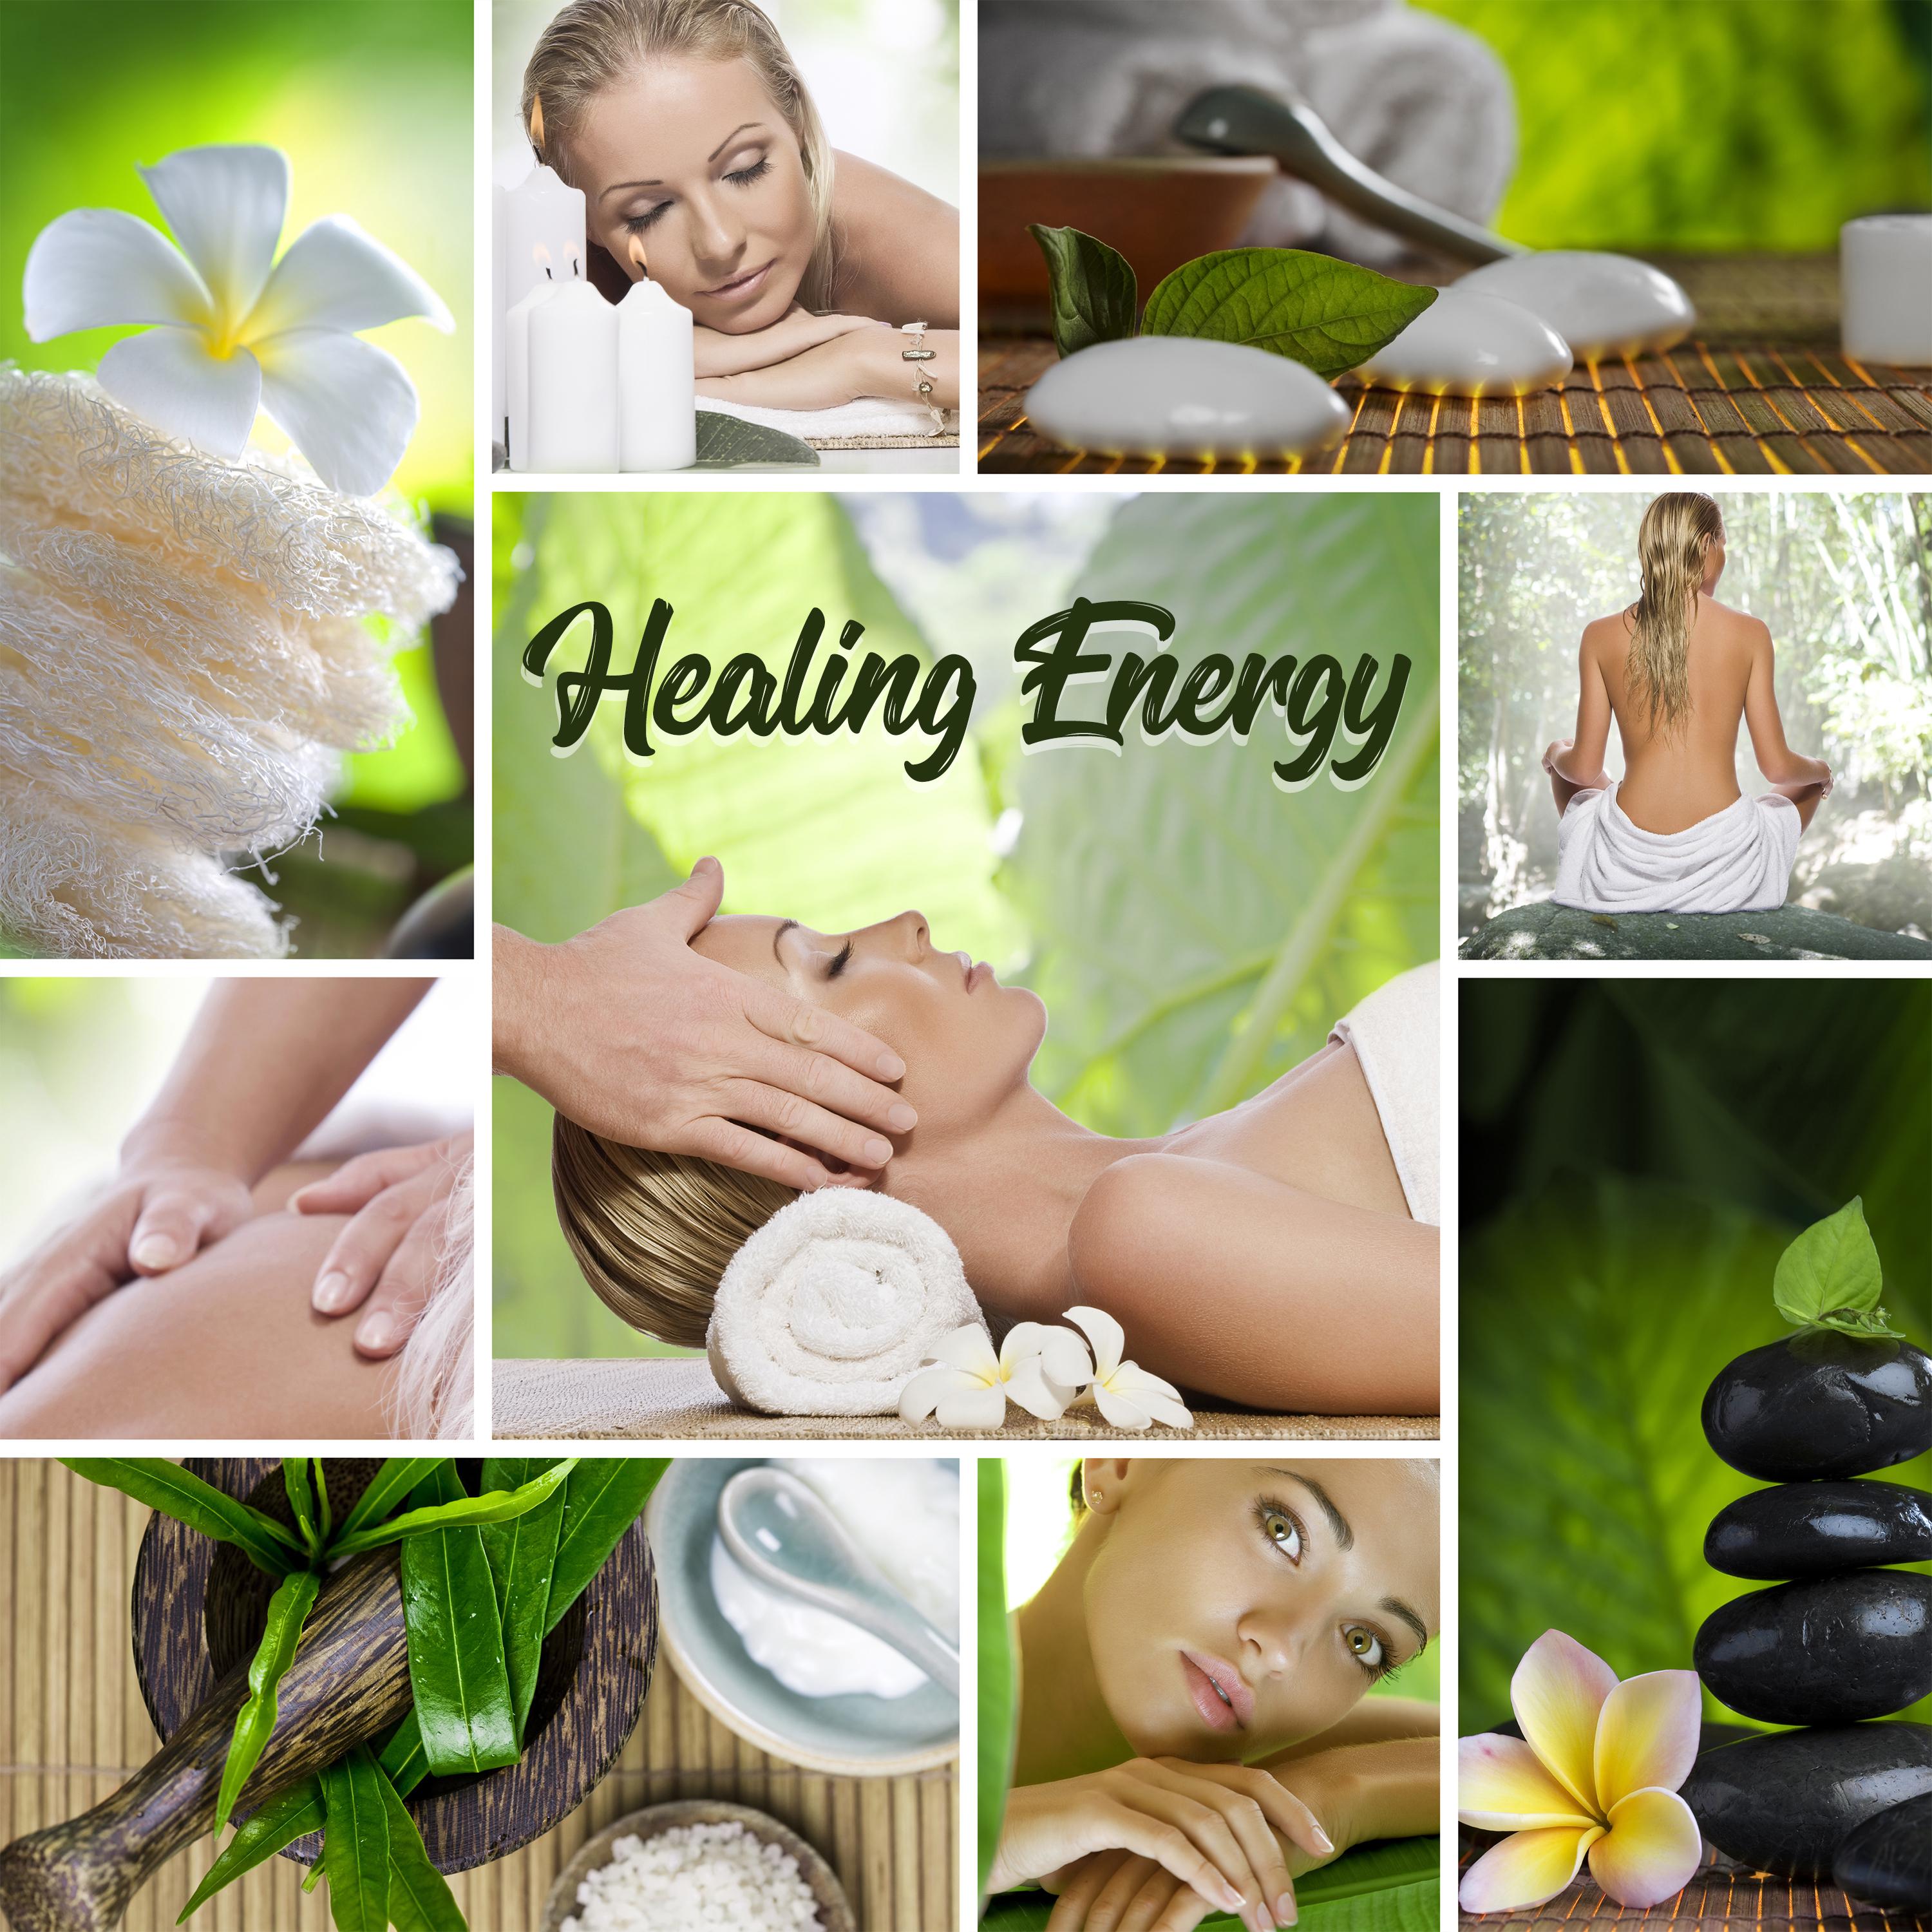 Healing Energy (Music for Meditation, Relaxation, Sleep, Spa, Massage & Other)